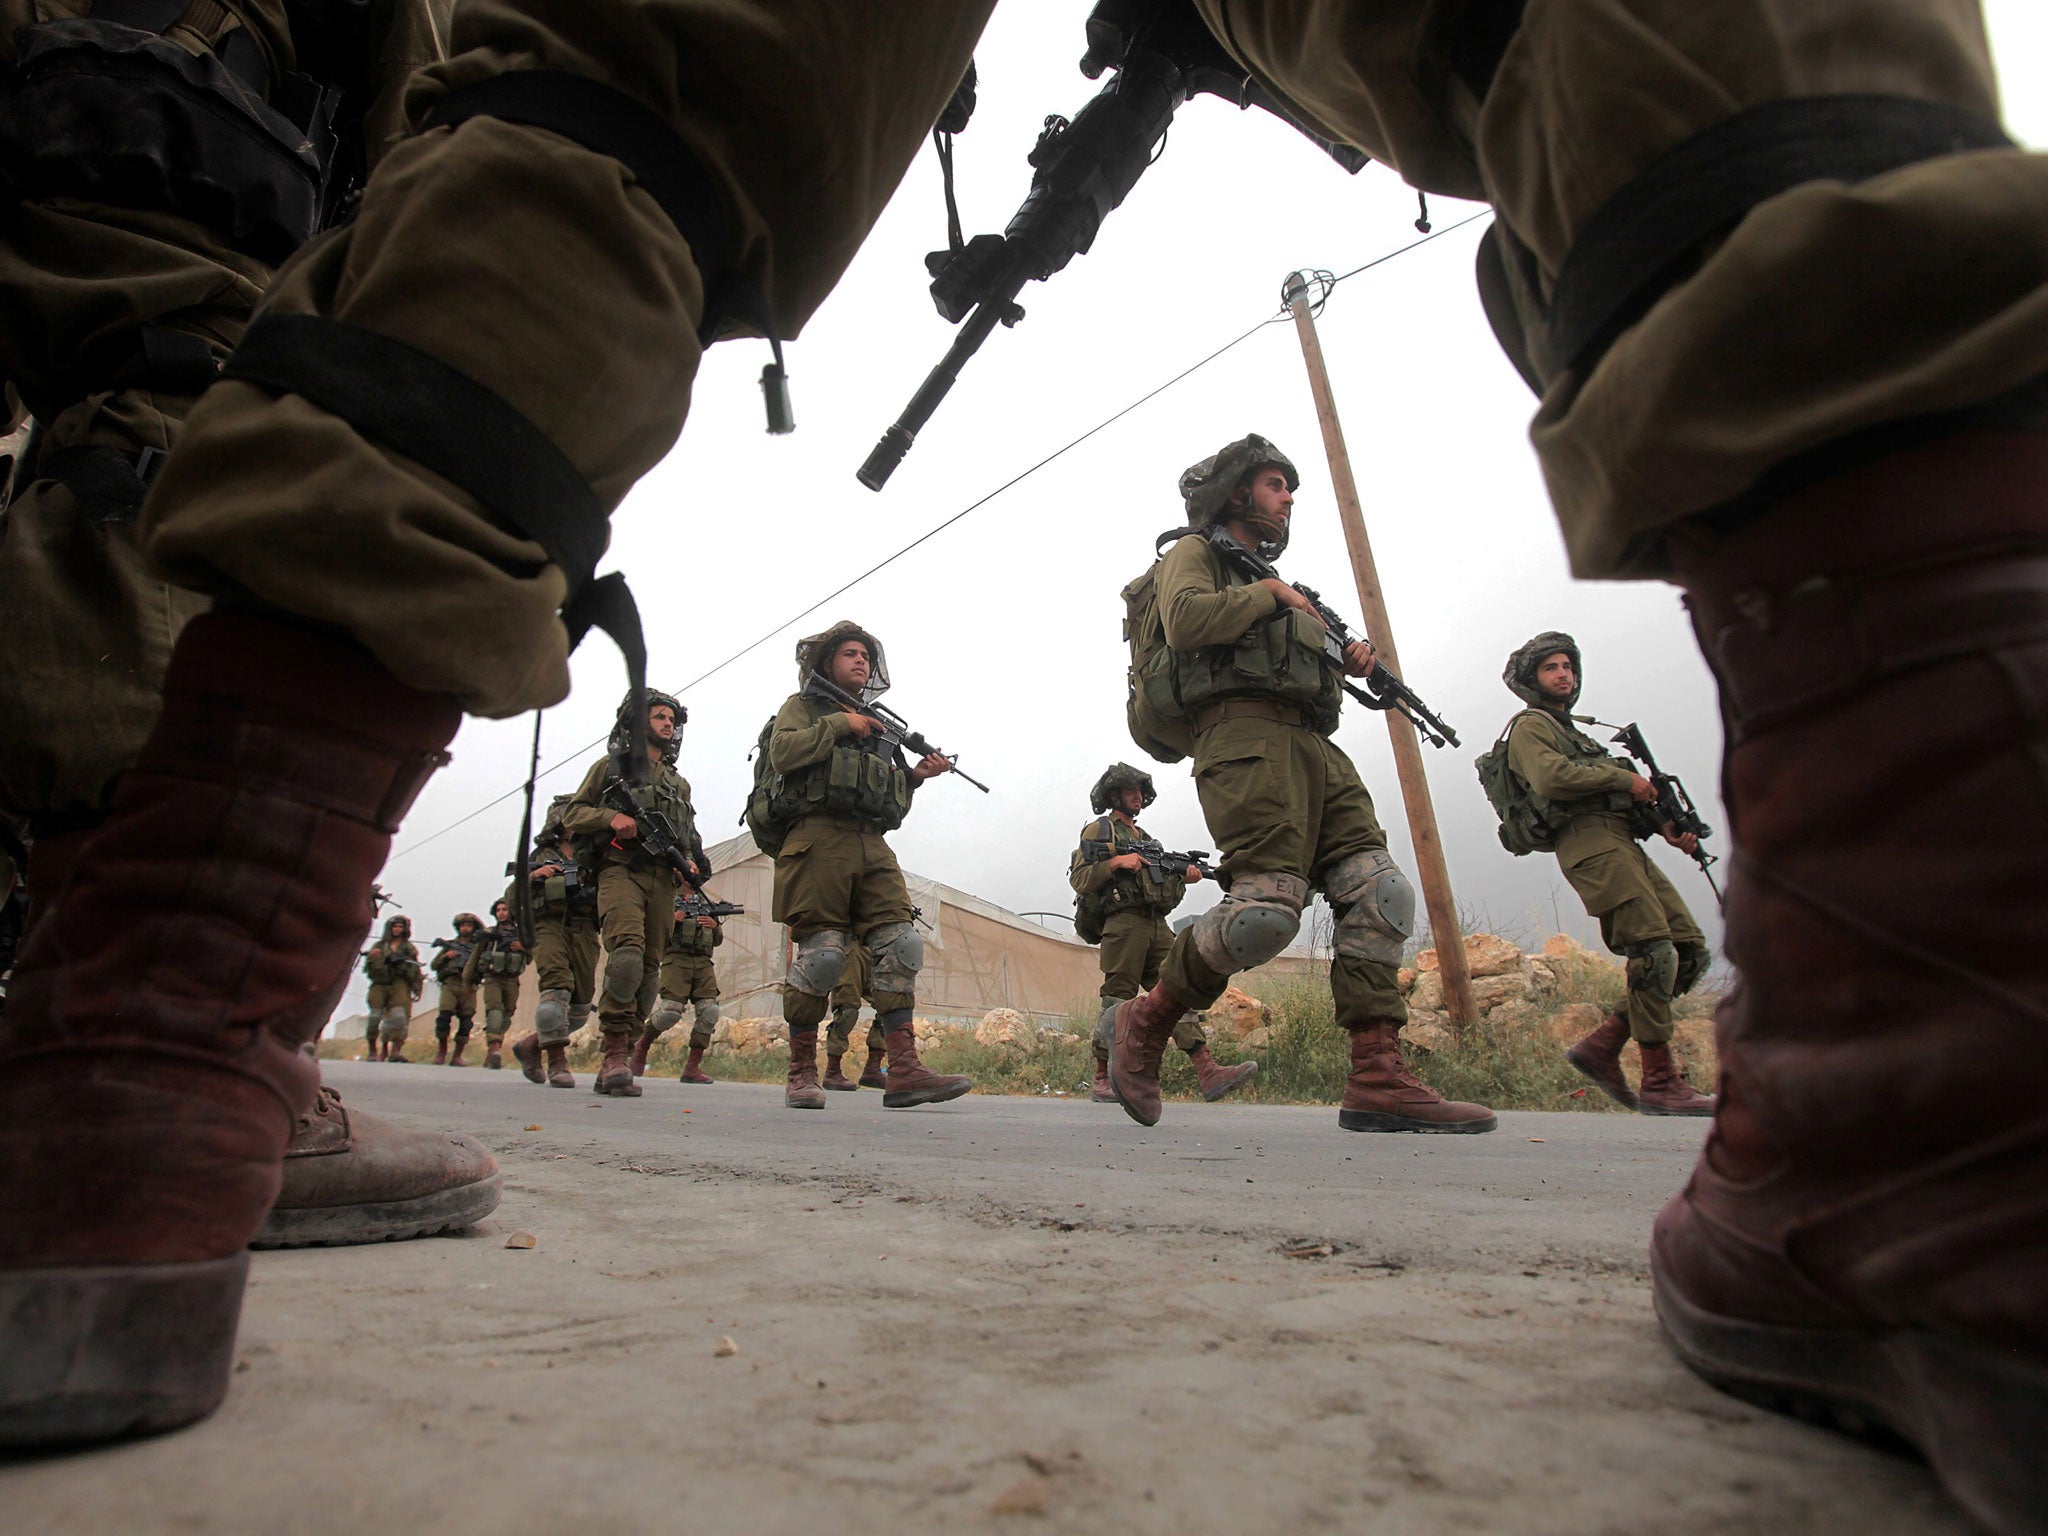 Israeli soldiers on patrol near the West Bank city of Hebron, as searches continue for three missing Israeli teenagers who are presumed to have been kidnapped